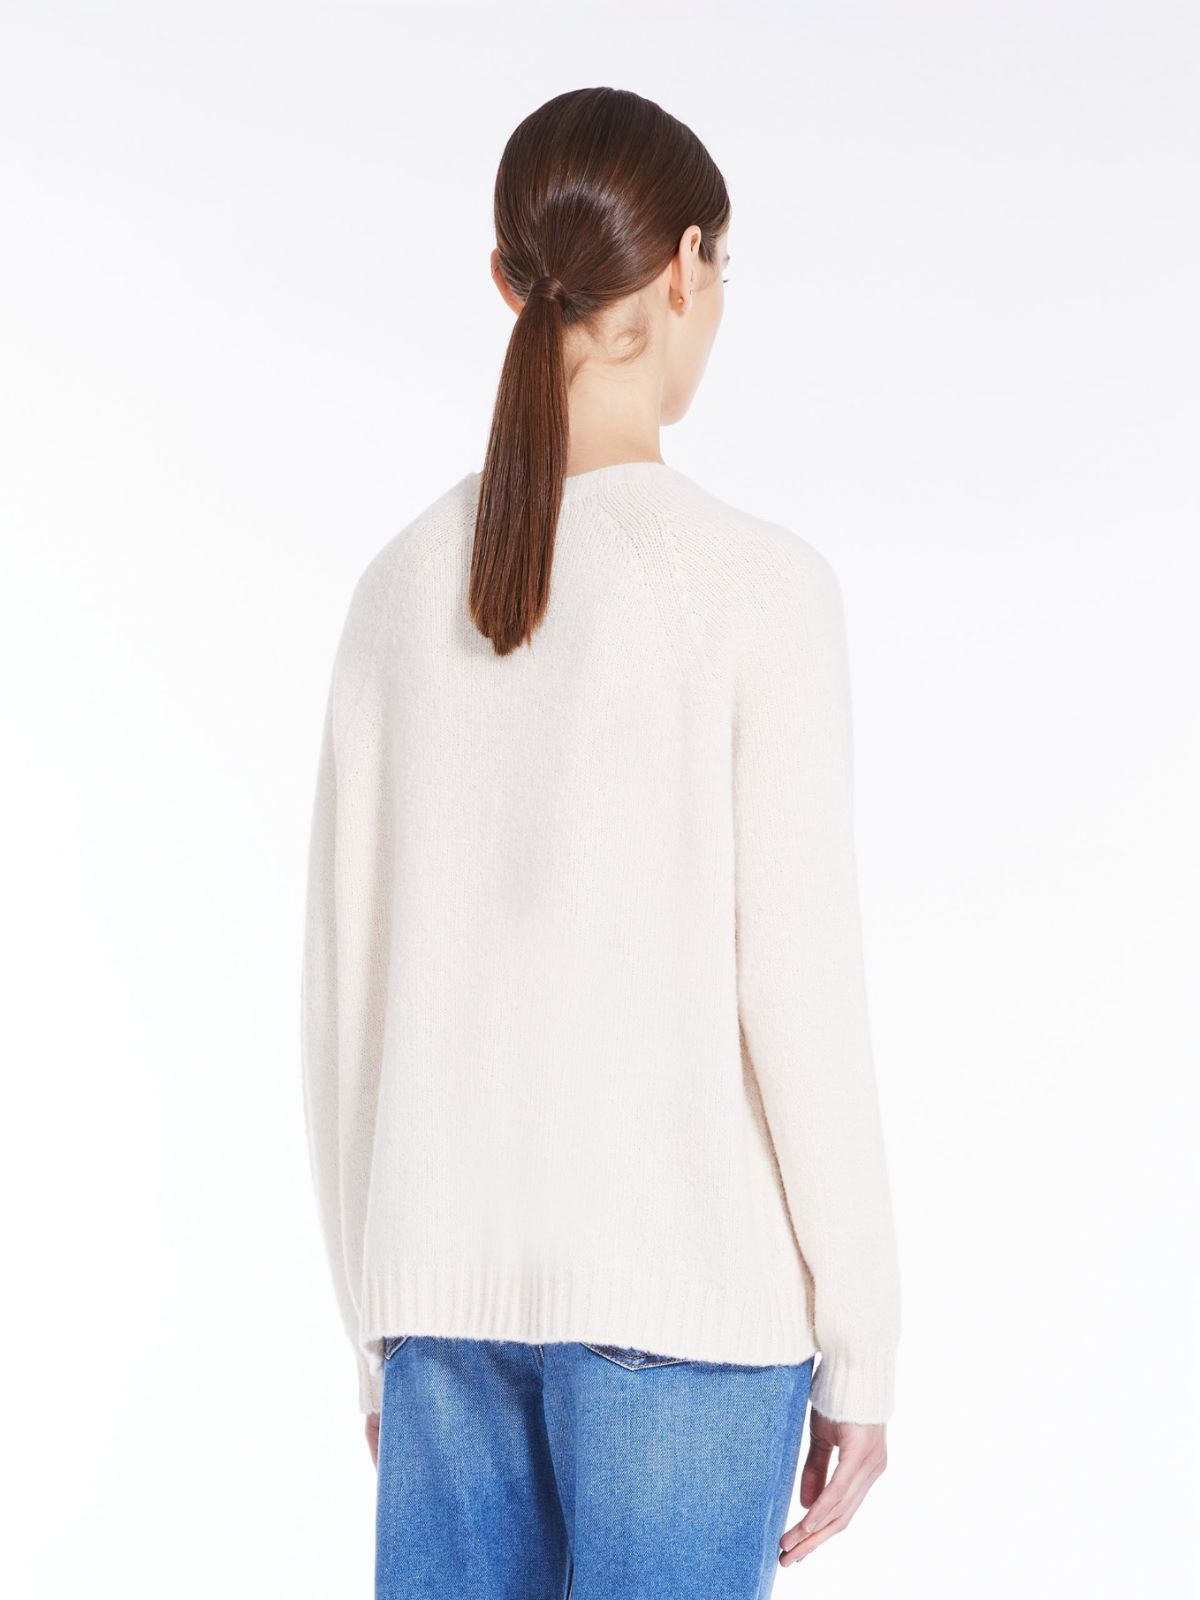 Soft knit top in alpaca and cotton - IVORY - Weekend Max Mara - 3